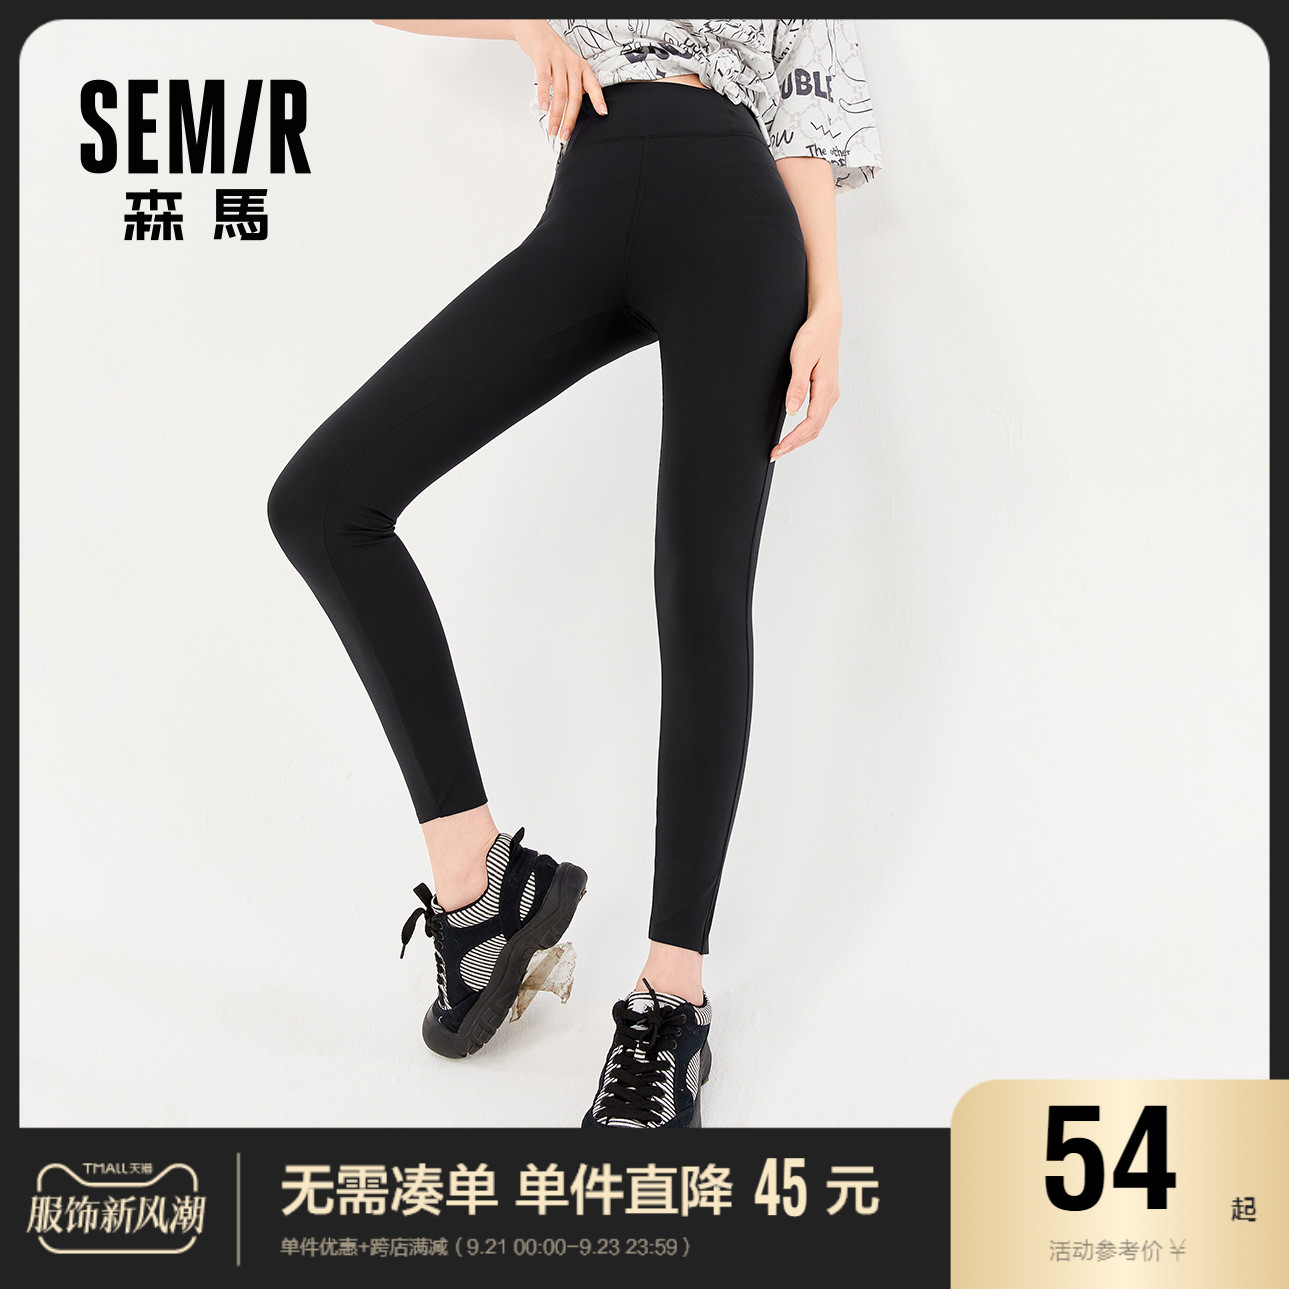 Senma casual pants for women, 2021 spring and autumn tight knit cropped pants, careful machine shark pants, leggings for women